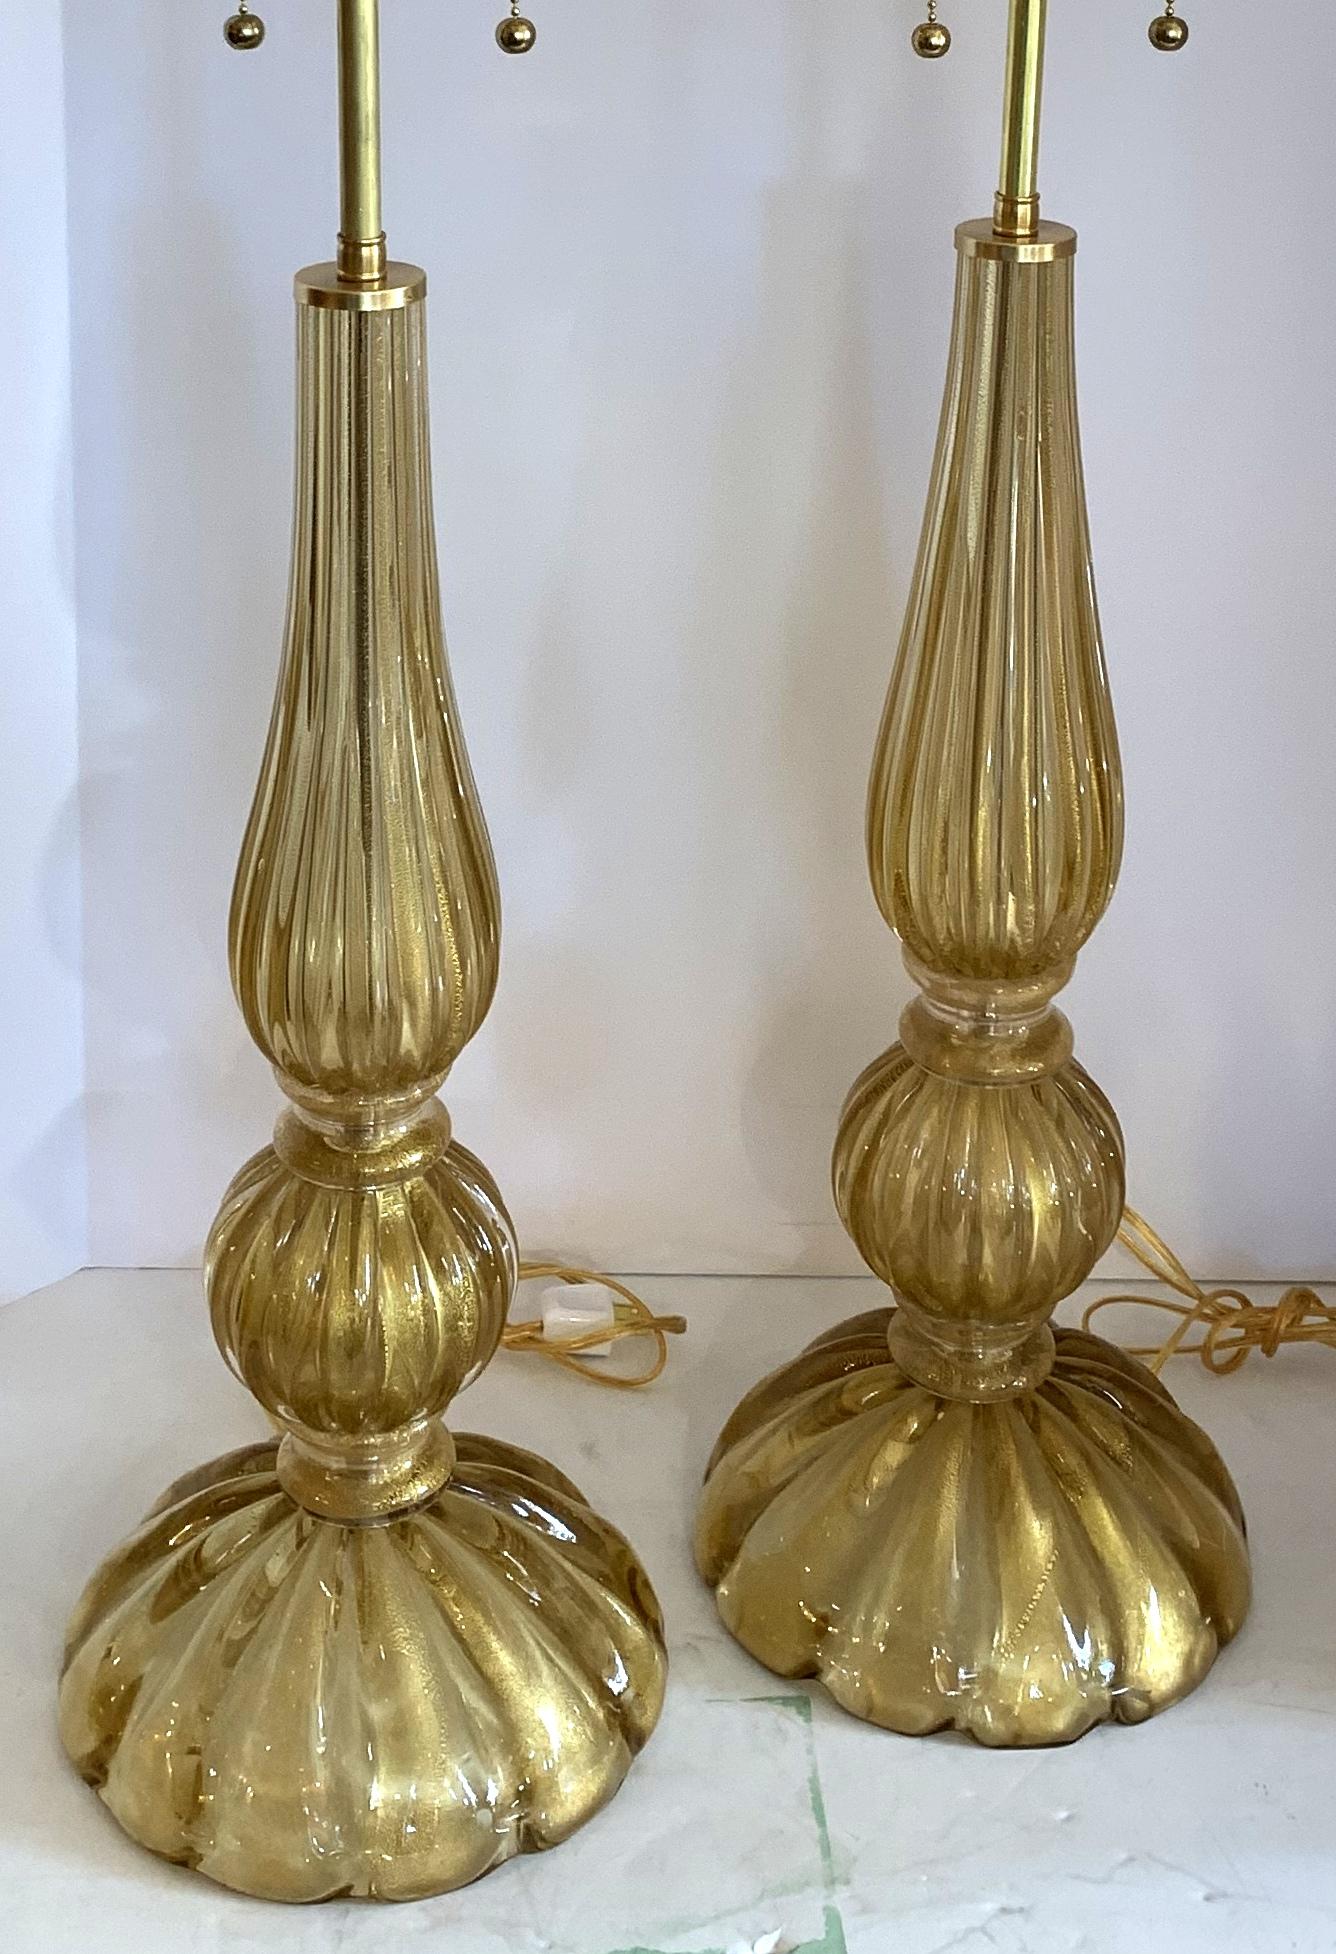 A wonderful pair of Mid-Century Modern Italian Murano Seguso style Venetian champagne gold fluted glass lamps in the Art Deco style with new brass fittings and wiring.
Purchased from Lorin Marsh.